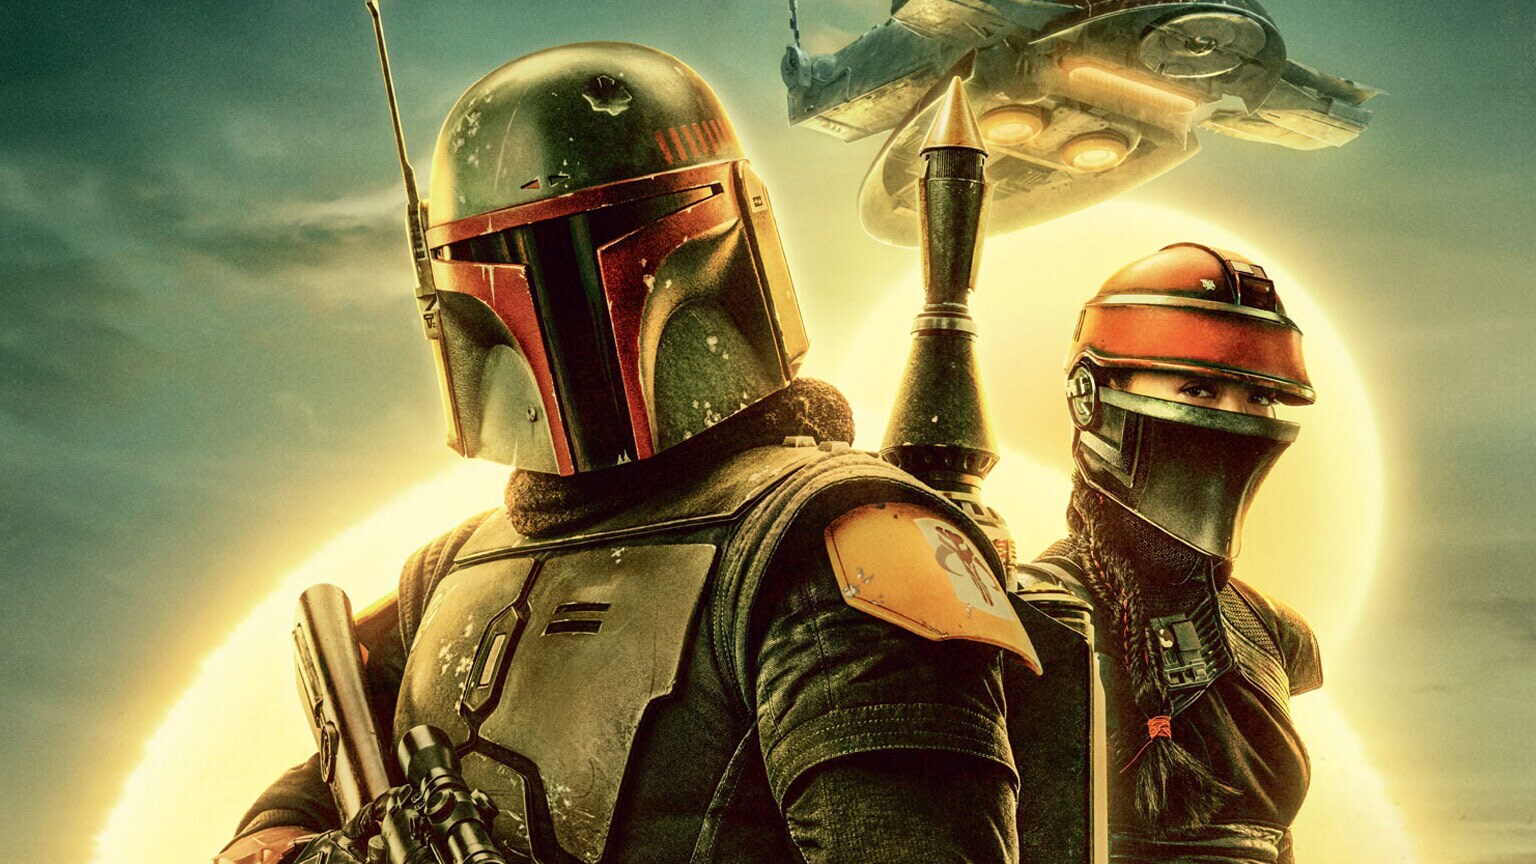 The Book of Boba Fett, Star Wars: Visions Receive Emmy Award Nominations